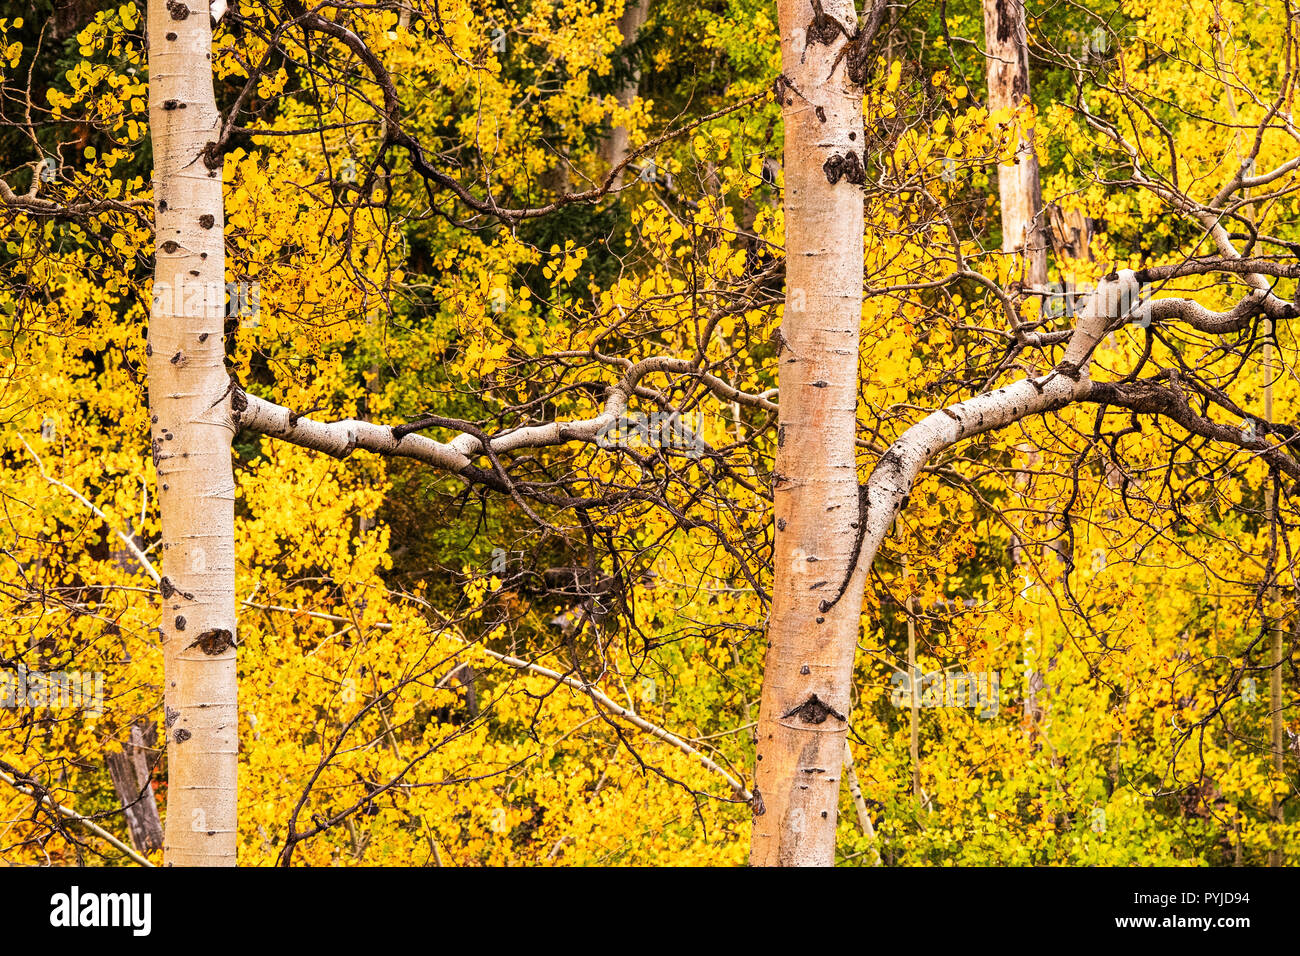 Aspen trees contrasted against colorful yellow autumn foliage. Stock Photo